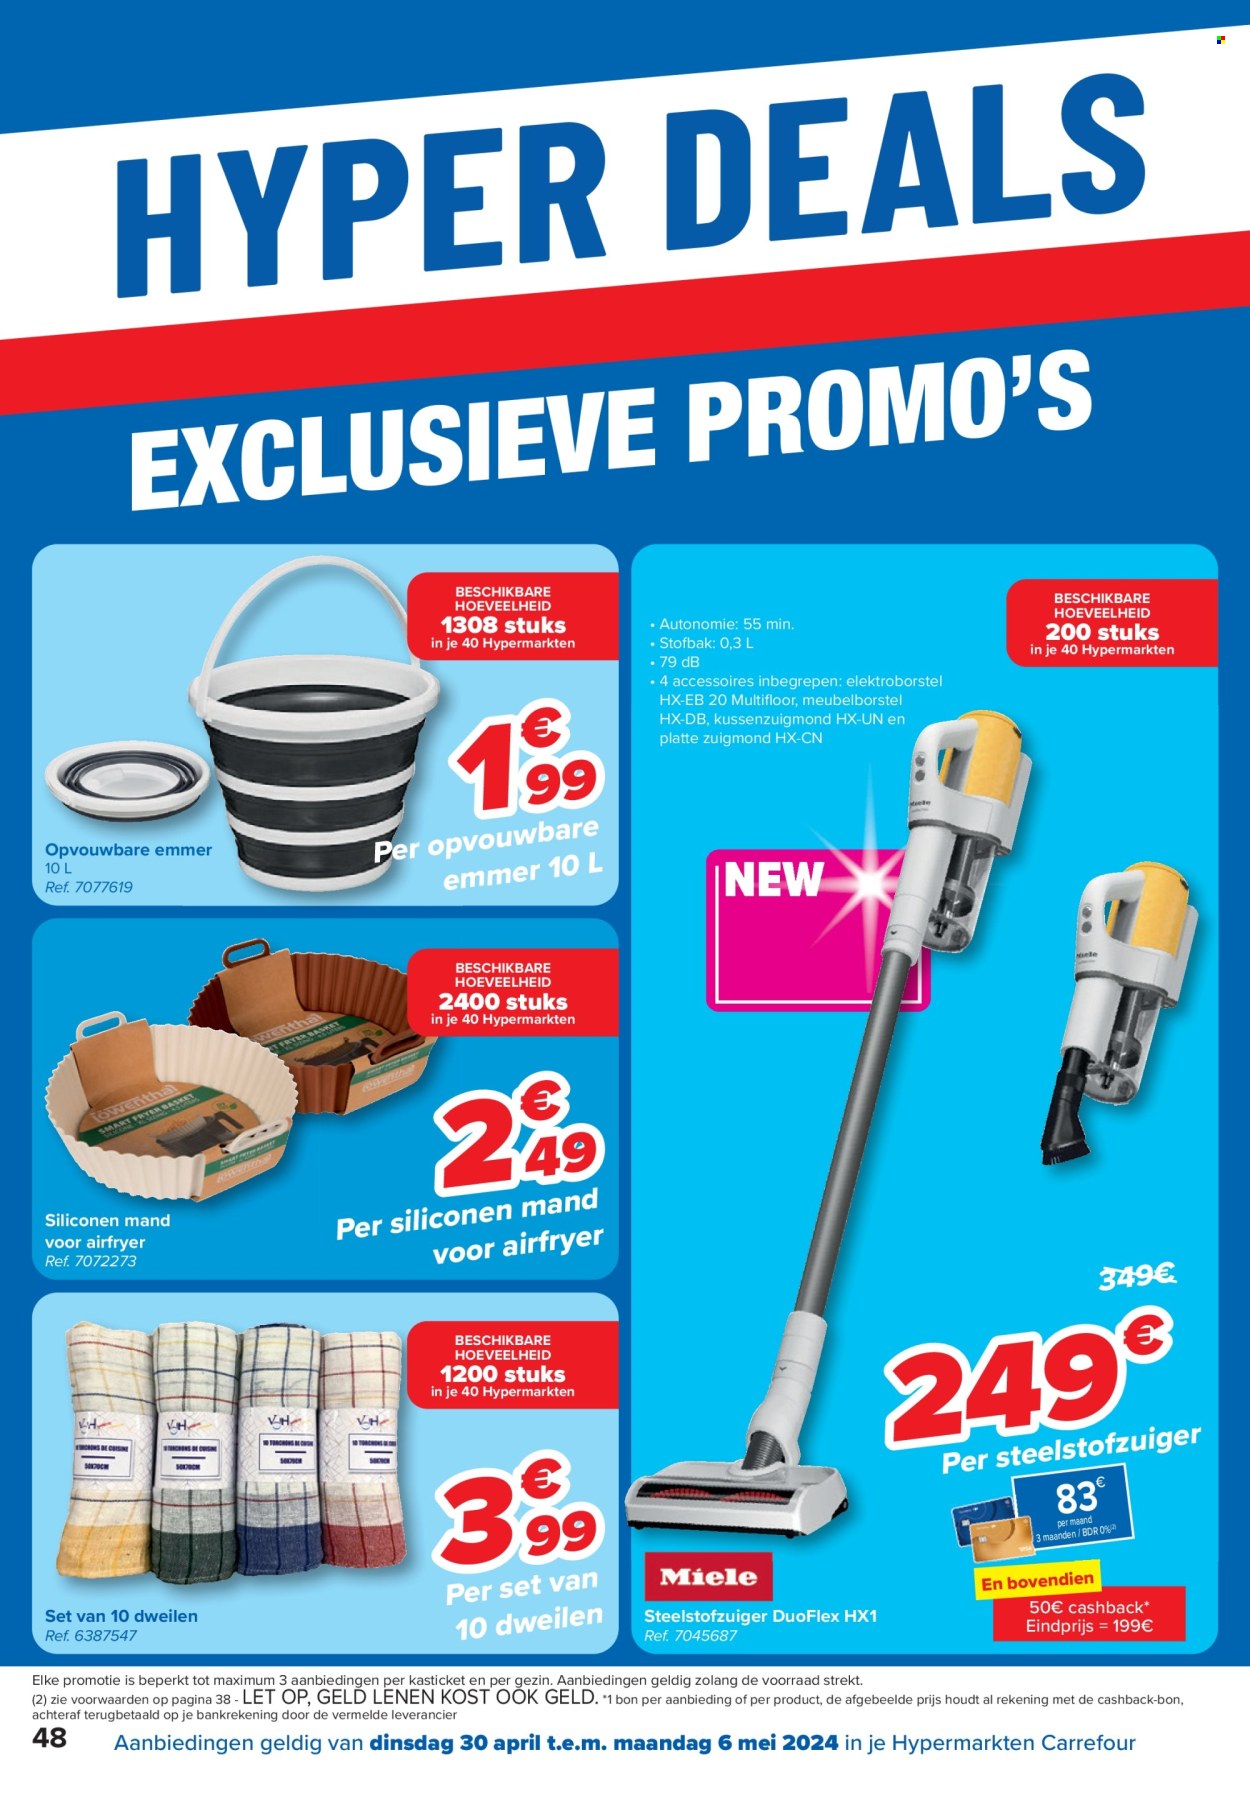 Catalogue Carrefour hypermarkt - 30.4.2024 - 13.5.2024. Page 48.